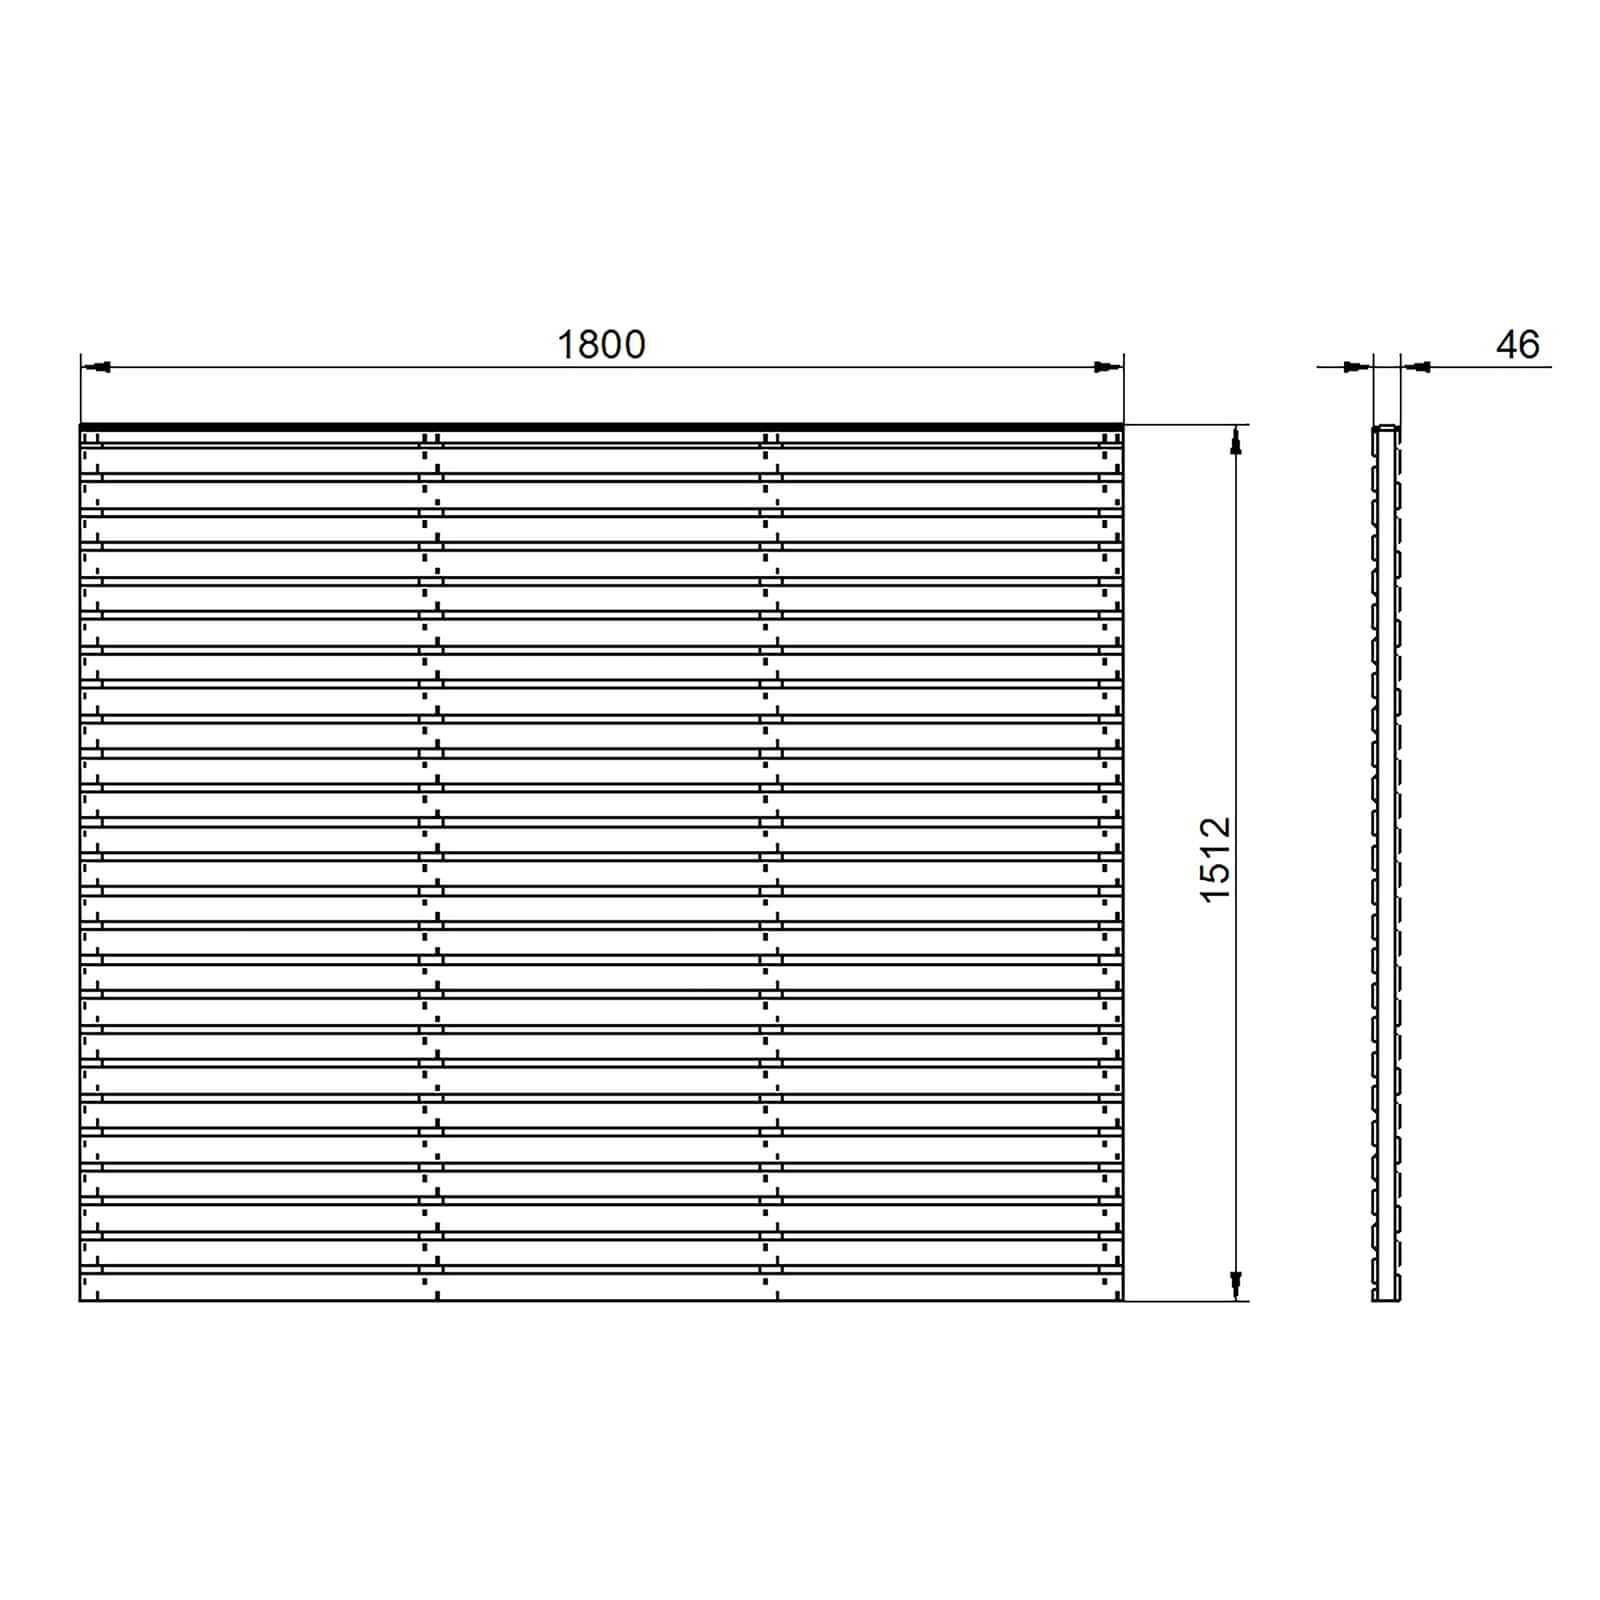 6ft x 5ft (1.8m x 1.5m) Pressure Treated Contemporary Double Slatted Fence Panel - Pack of 5